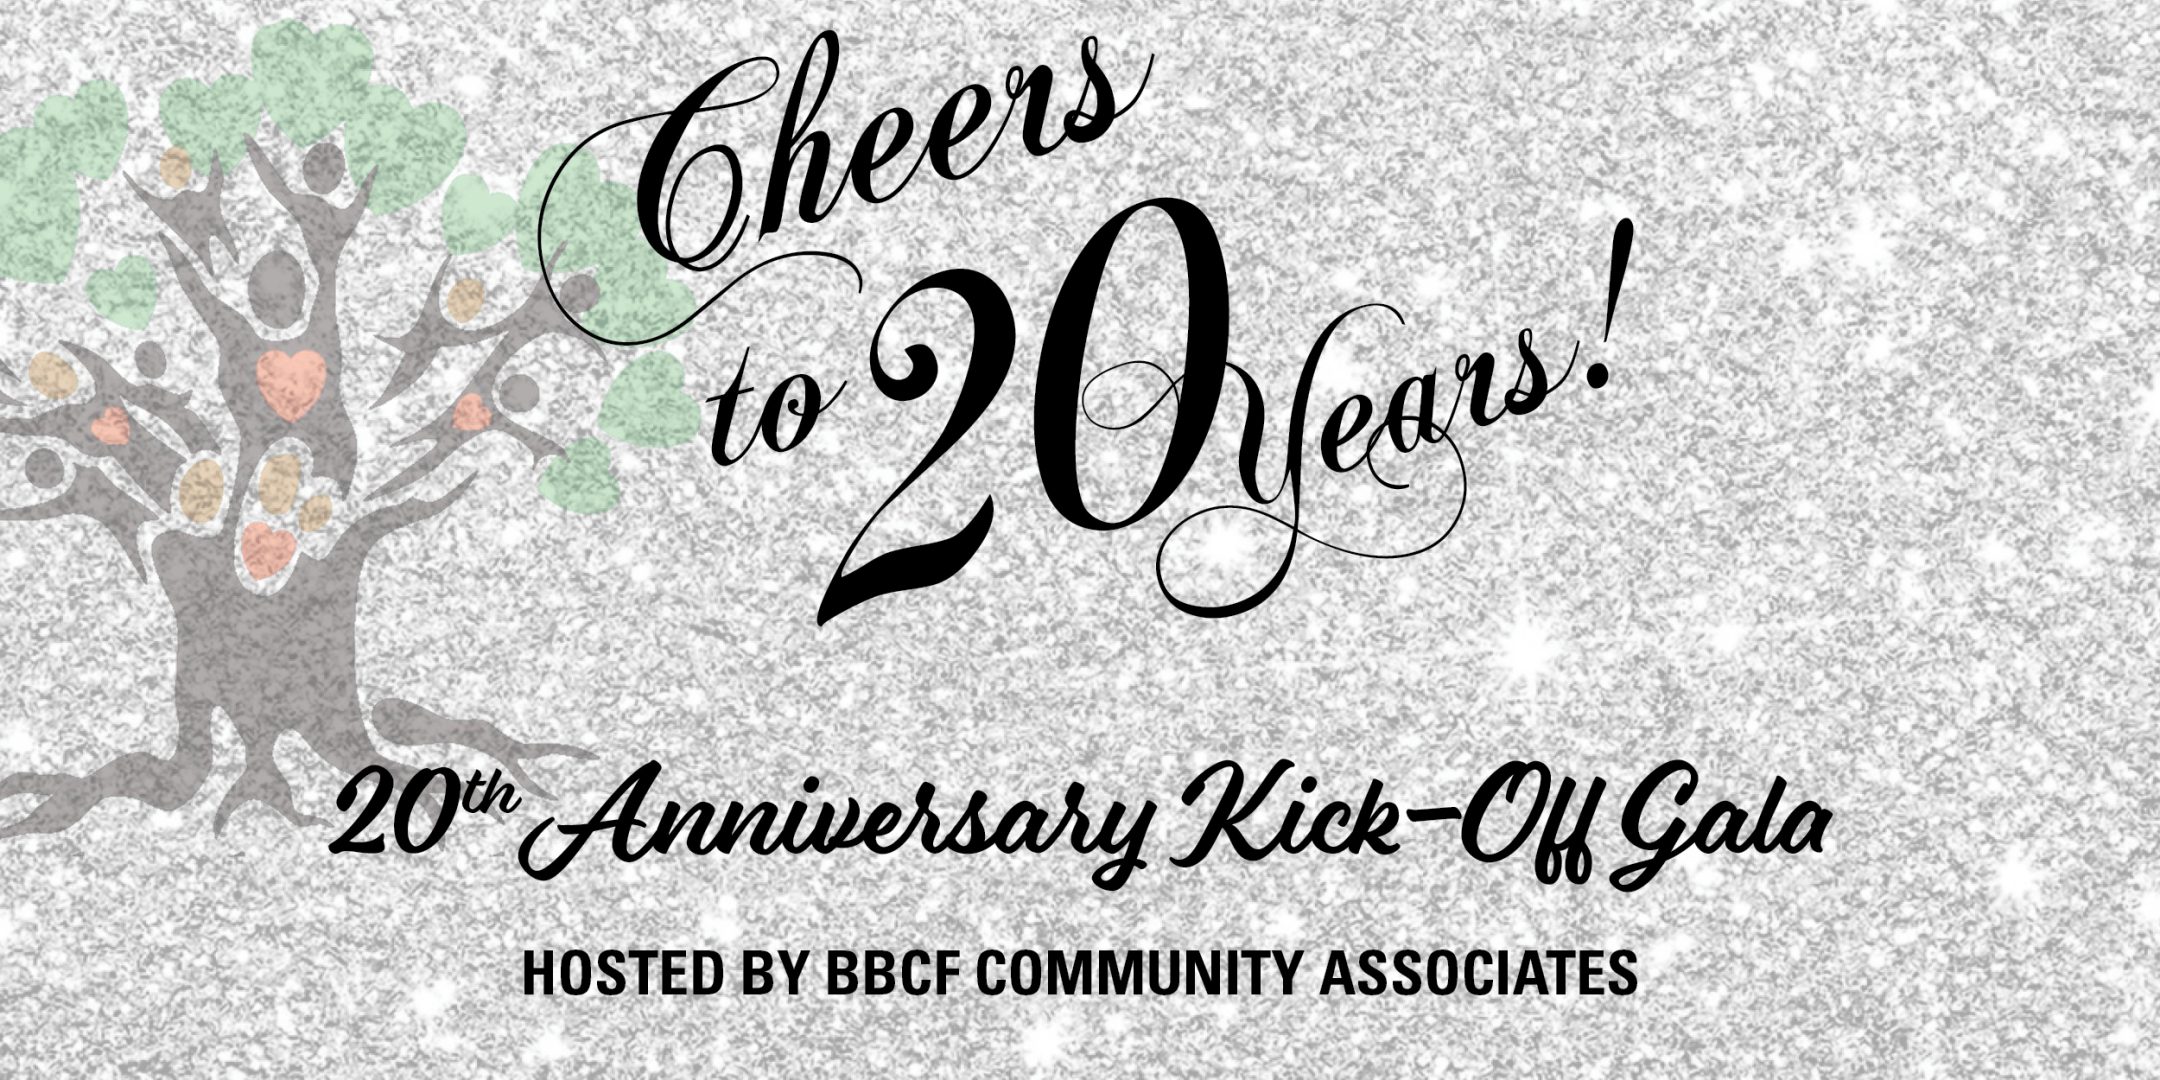 Cheers to 20 years! 20th Anniversary Kick-off Gala - Hosted by the Community Associates